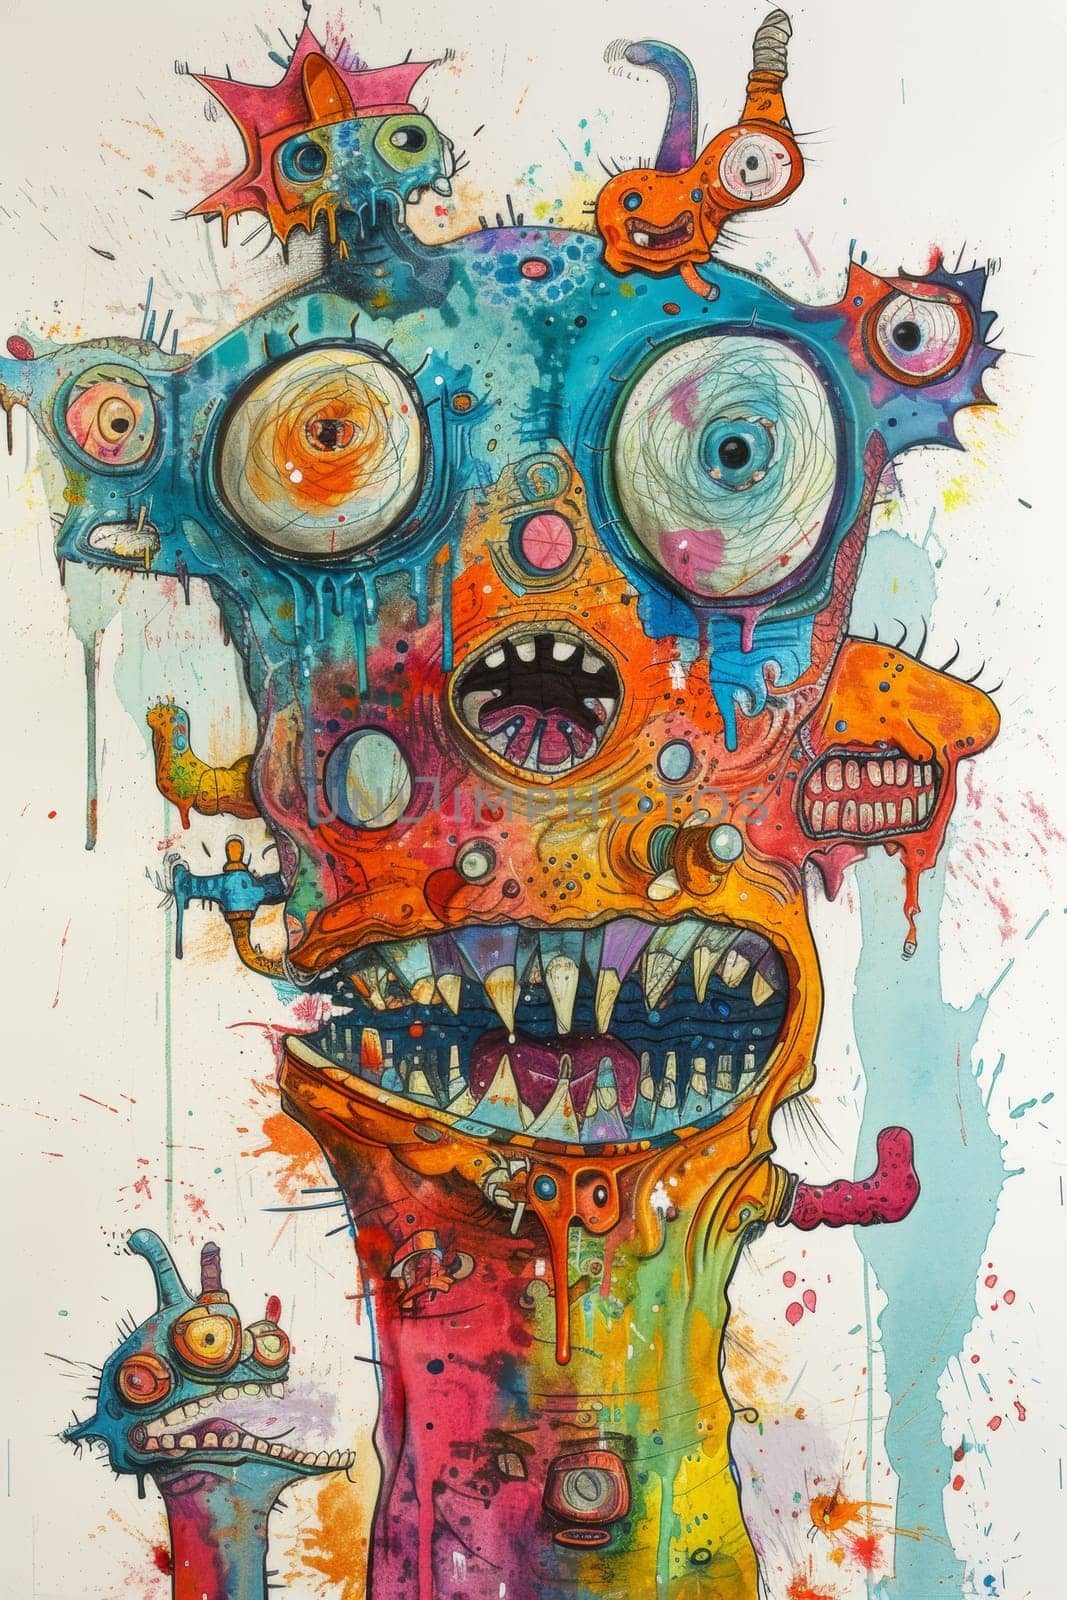 A colorful painting of a monster with many eyes and mouths